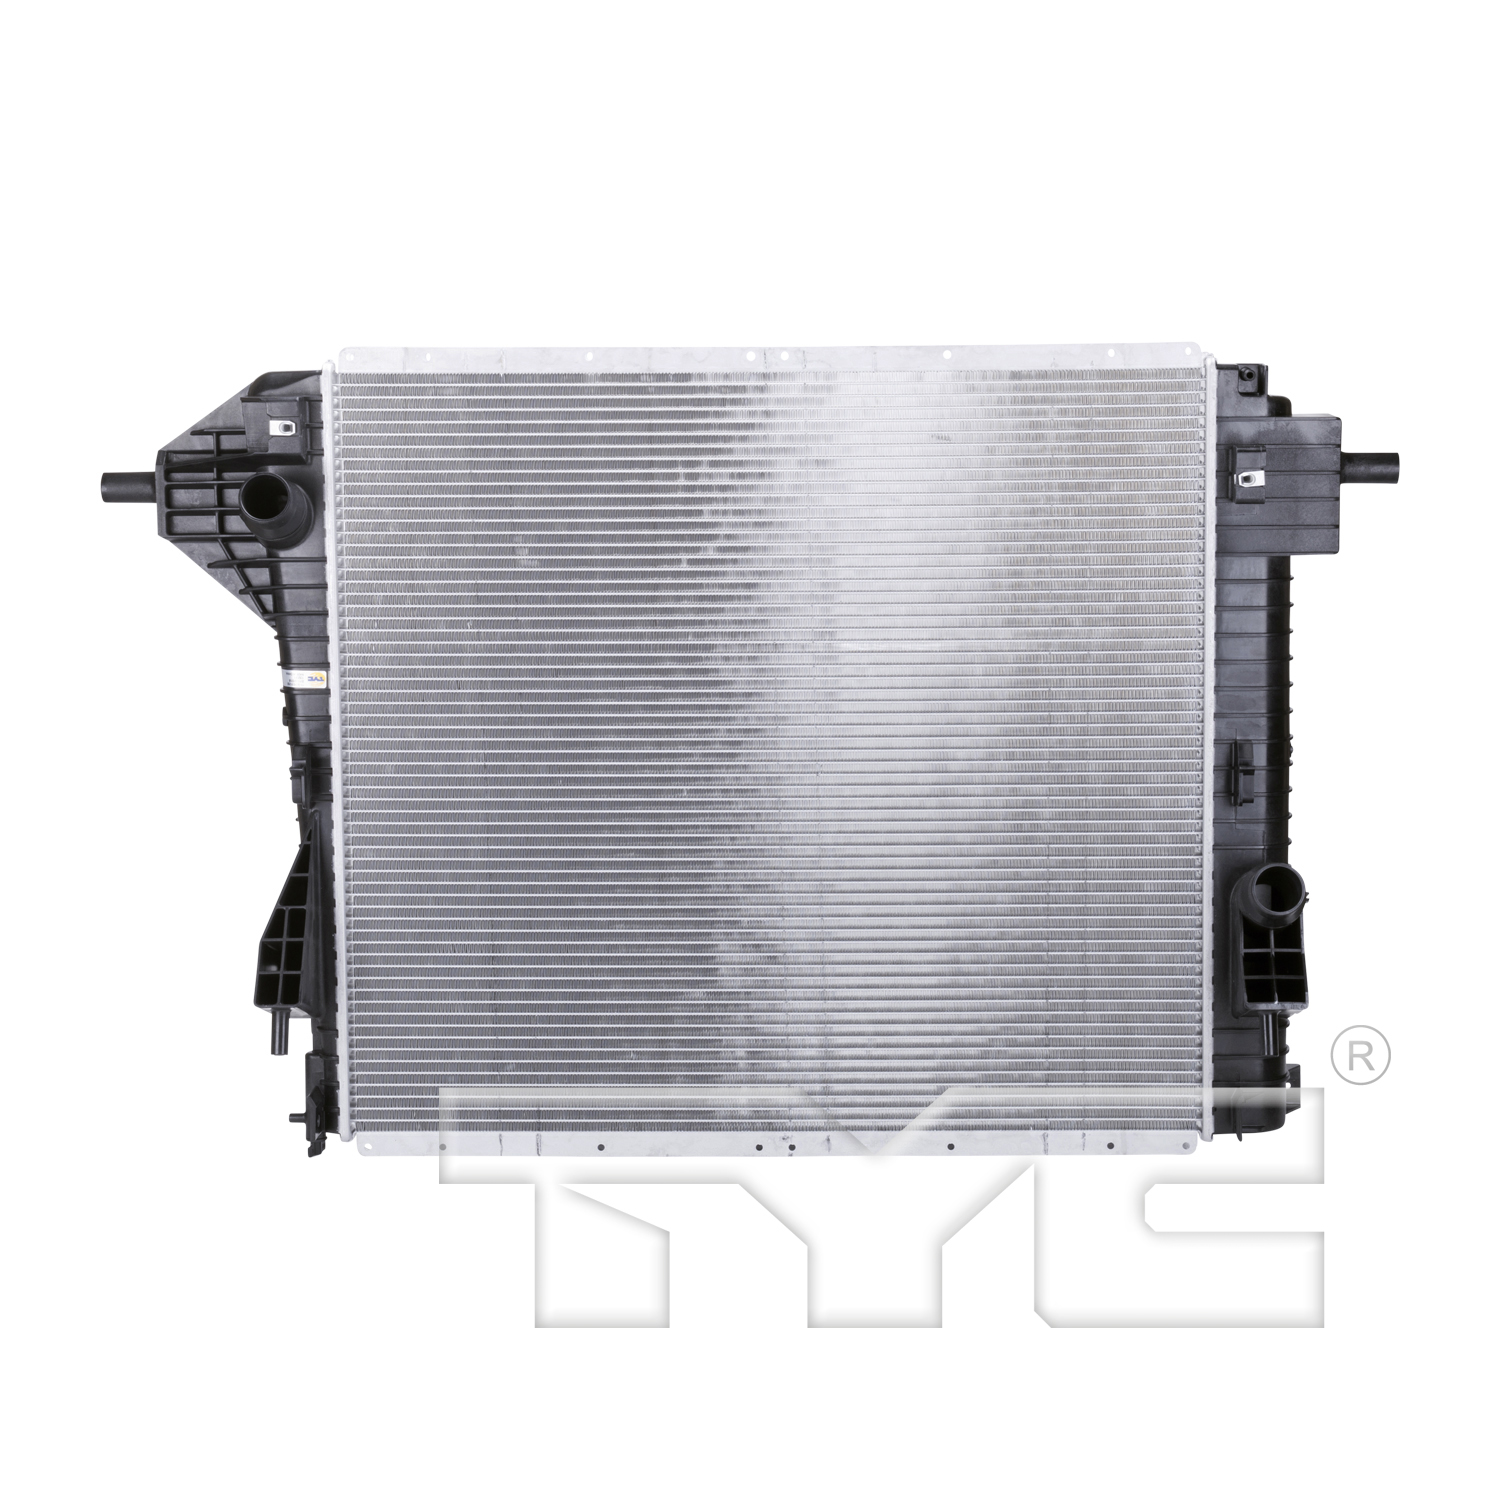 Aftermarket RADIATORS for FORD - F-350 SUPER DUTY, F-350 SUPER DUTY,11-16,Radiator assembly